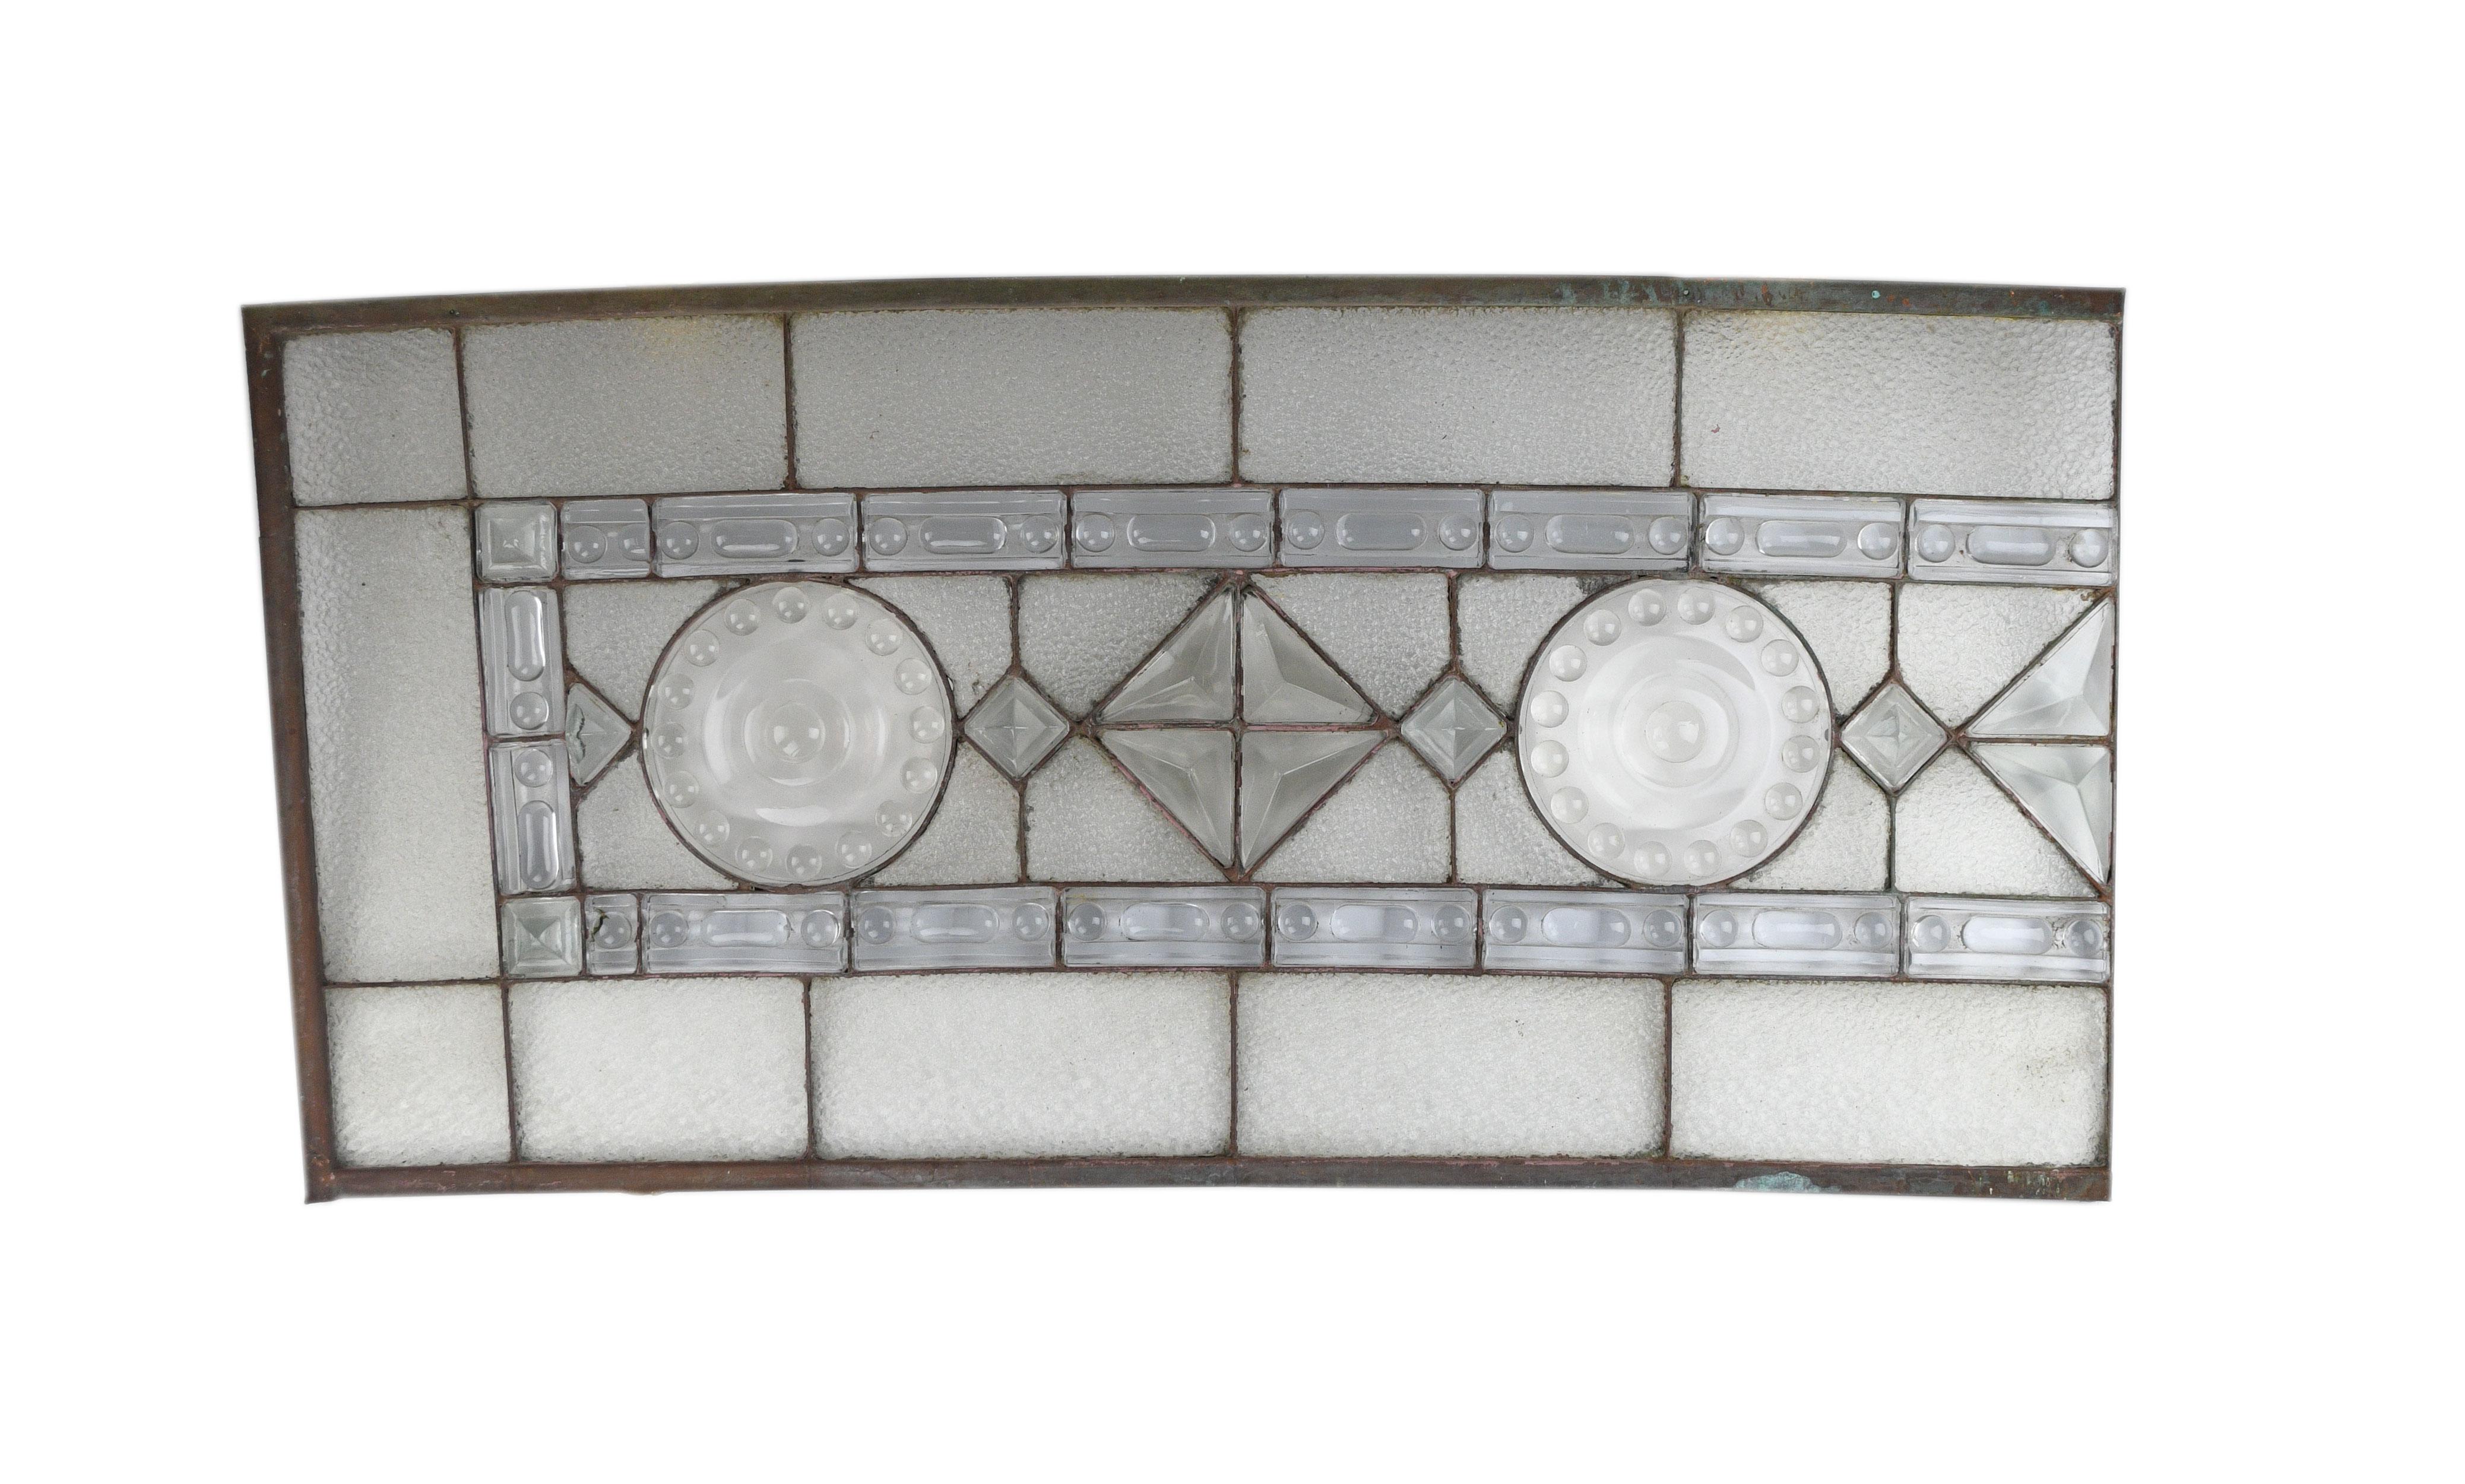 This stunningly crafted window features geometric molded glass on handsome textured glass. A symmetrical mix of sharp lines and curved shapes give each of the 4 pieces of this massive window a unique look.